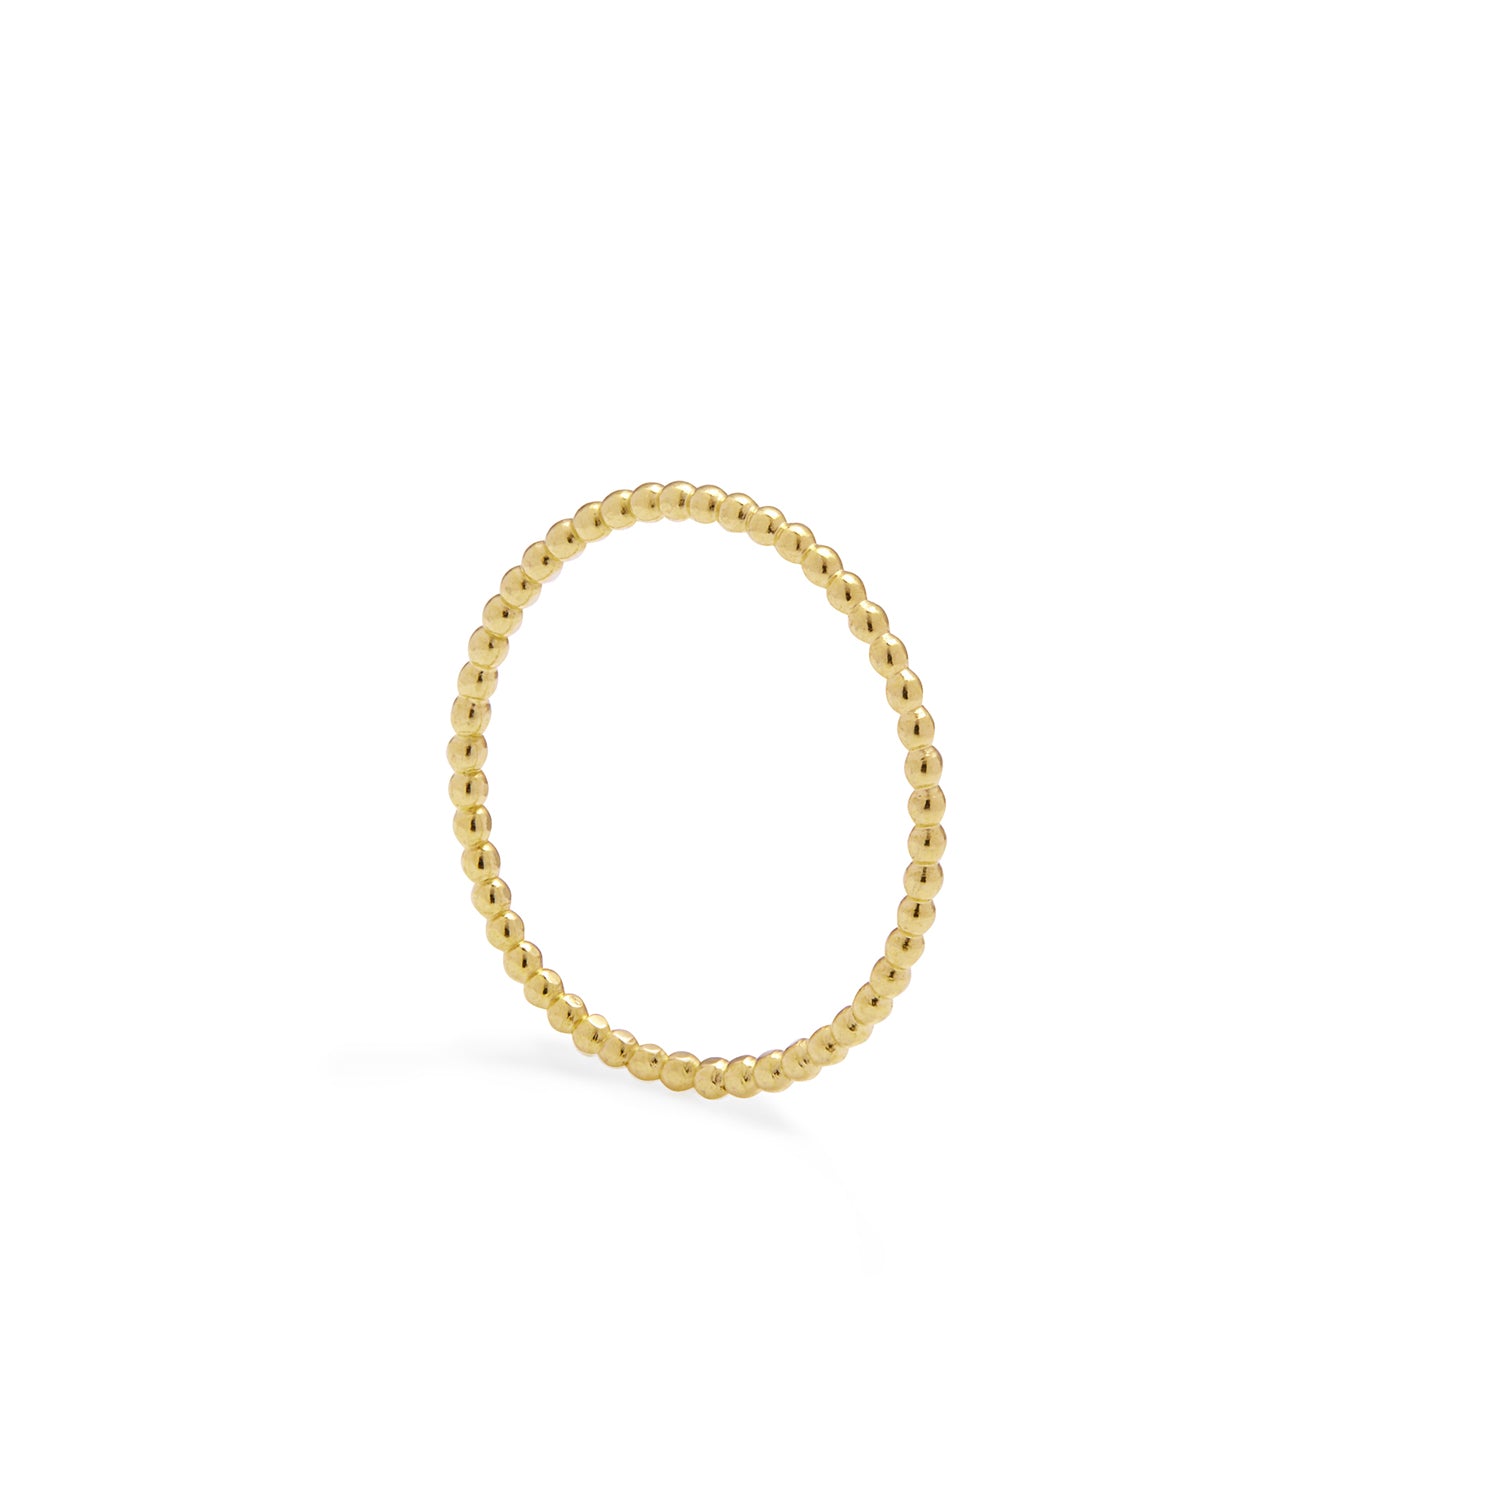 Skinny Sphere Stacking Ring - Gold - Myia Bonner Jewellery